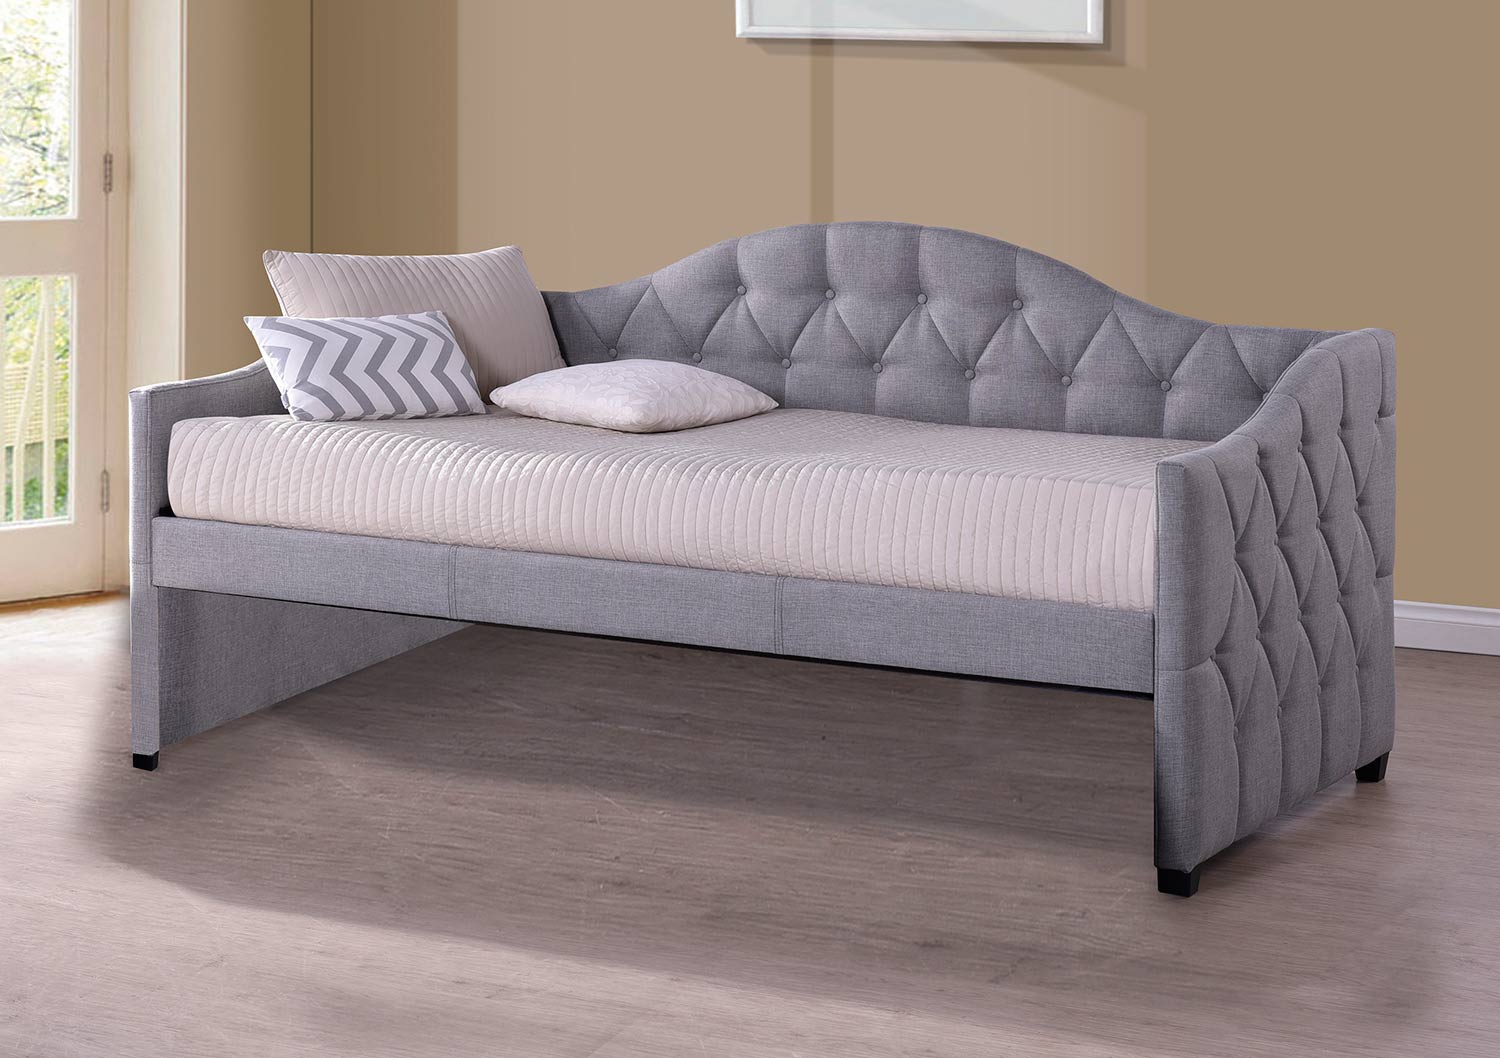 Hillsdale Jamie Daybed - Grey Fabric